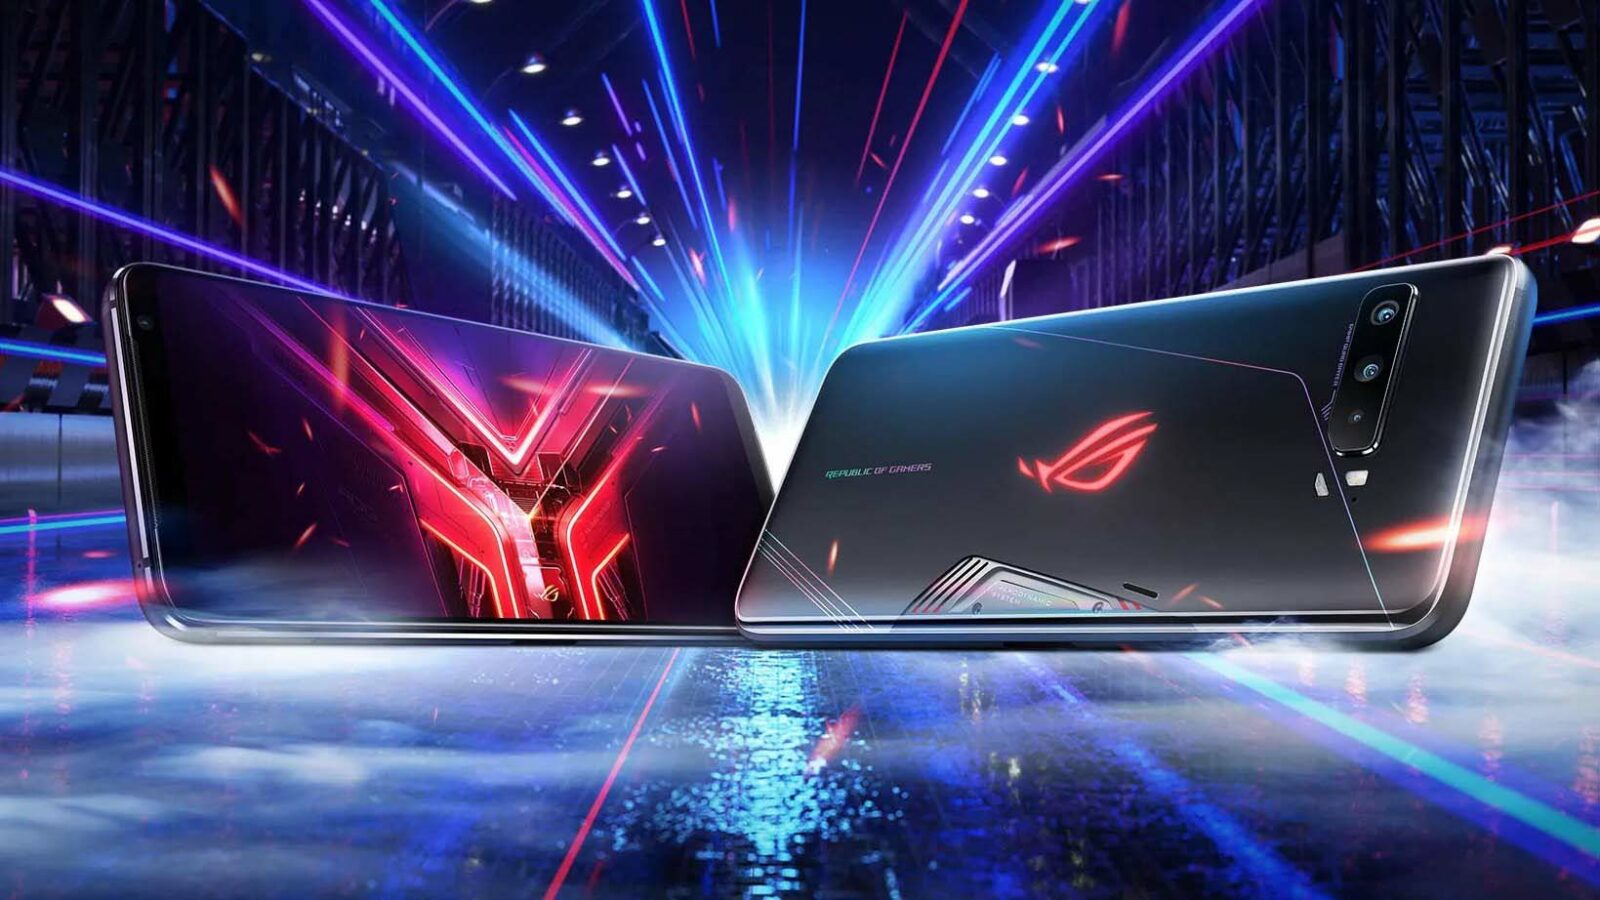 Asus ROG Phone 3 With Snapdragon 865+ SoC in India: Price, Specification